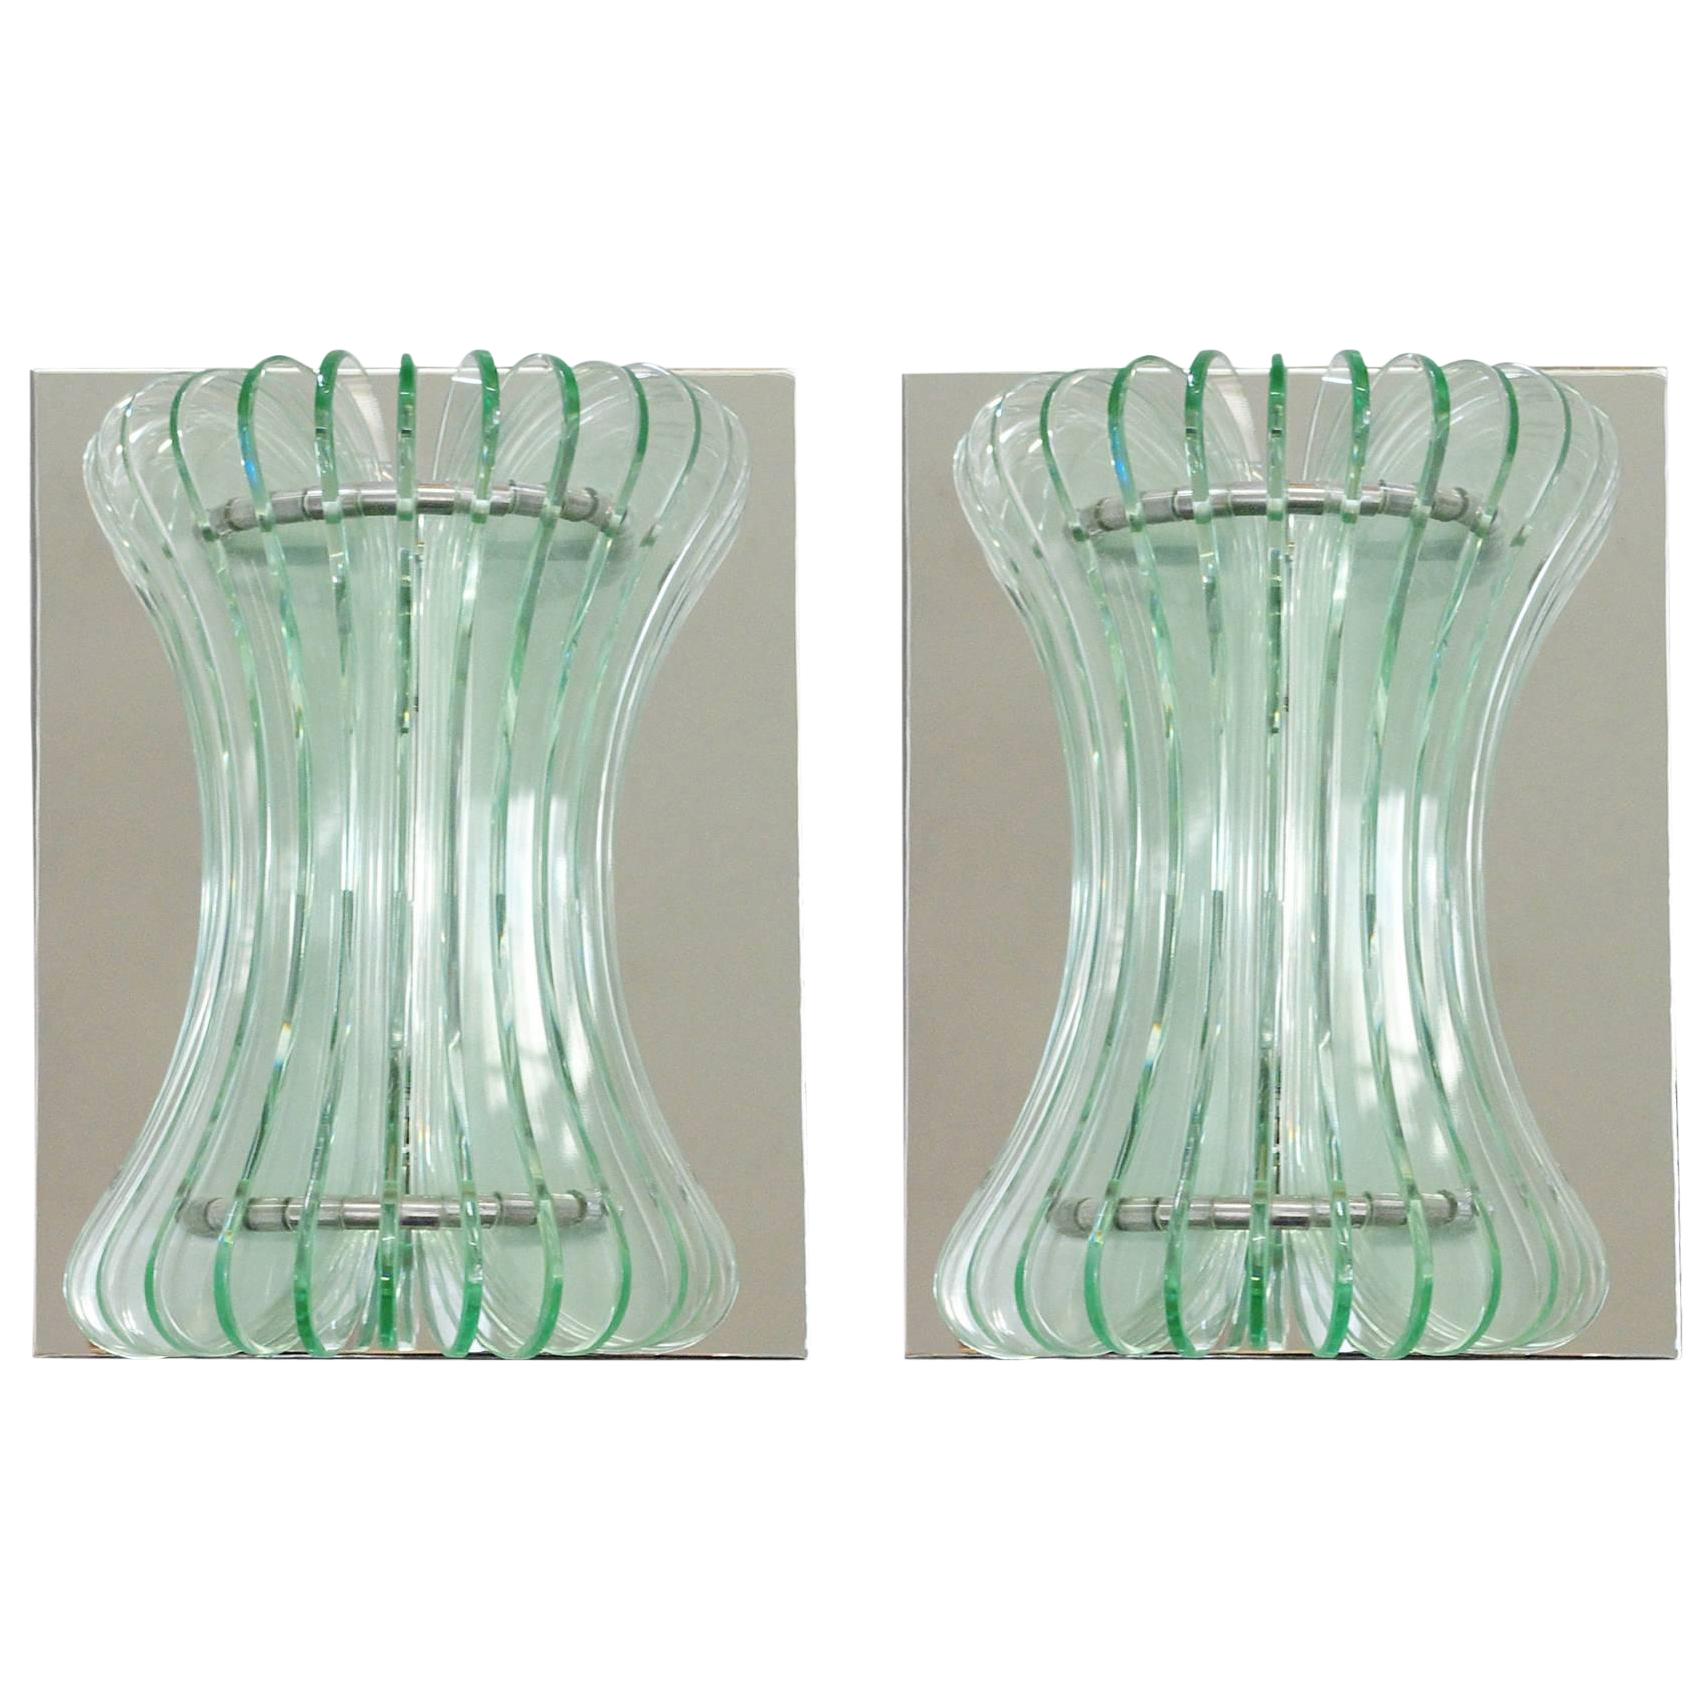 Pair of Vintage Italian Sconces w/ Beveled Glass Designed by Cristal Arte, 1960s For Sale